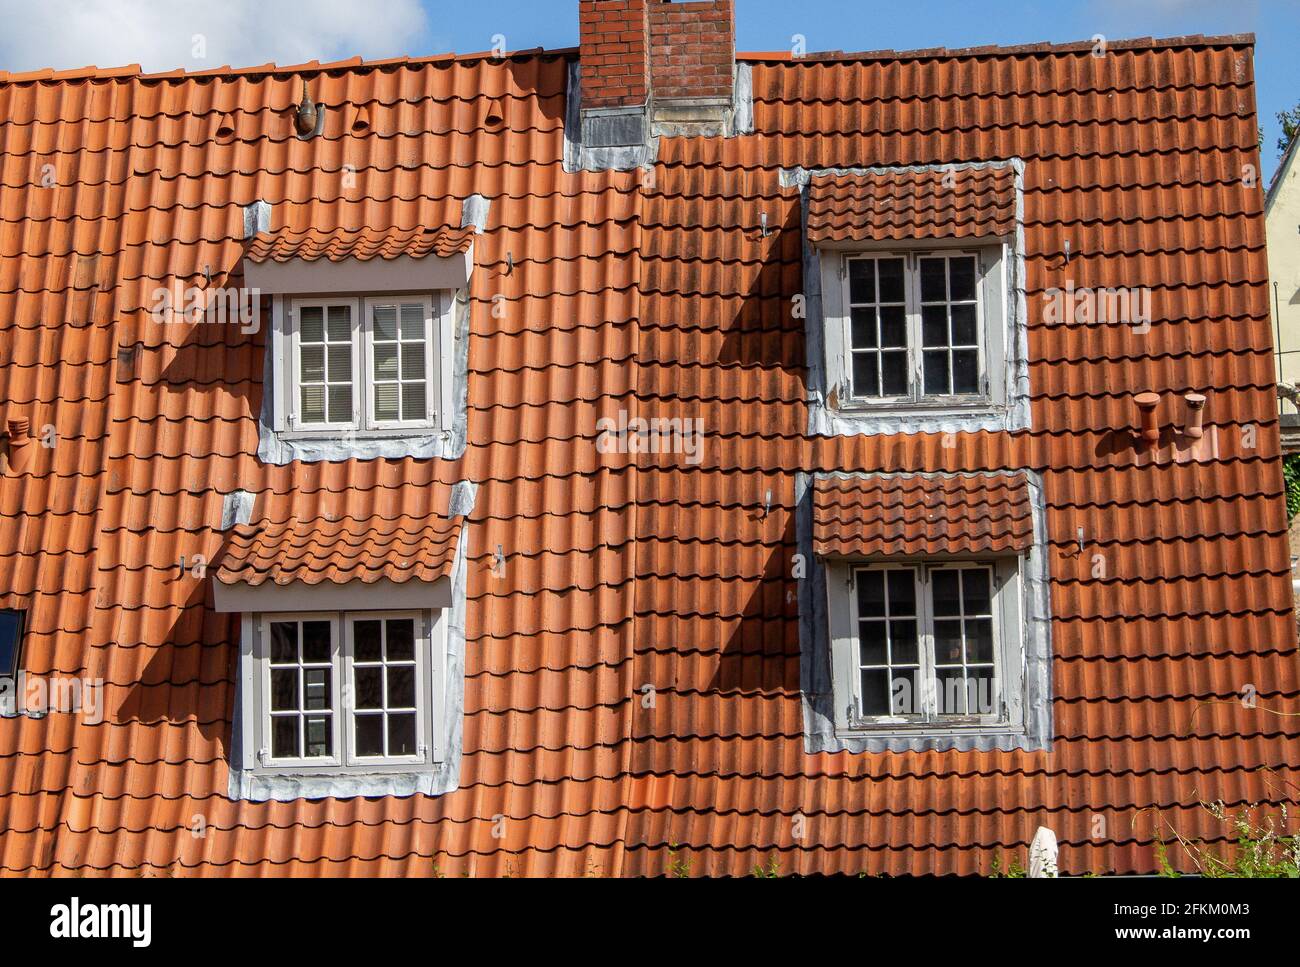 An old building with red shingles roofing design Stock Photo